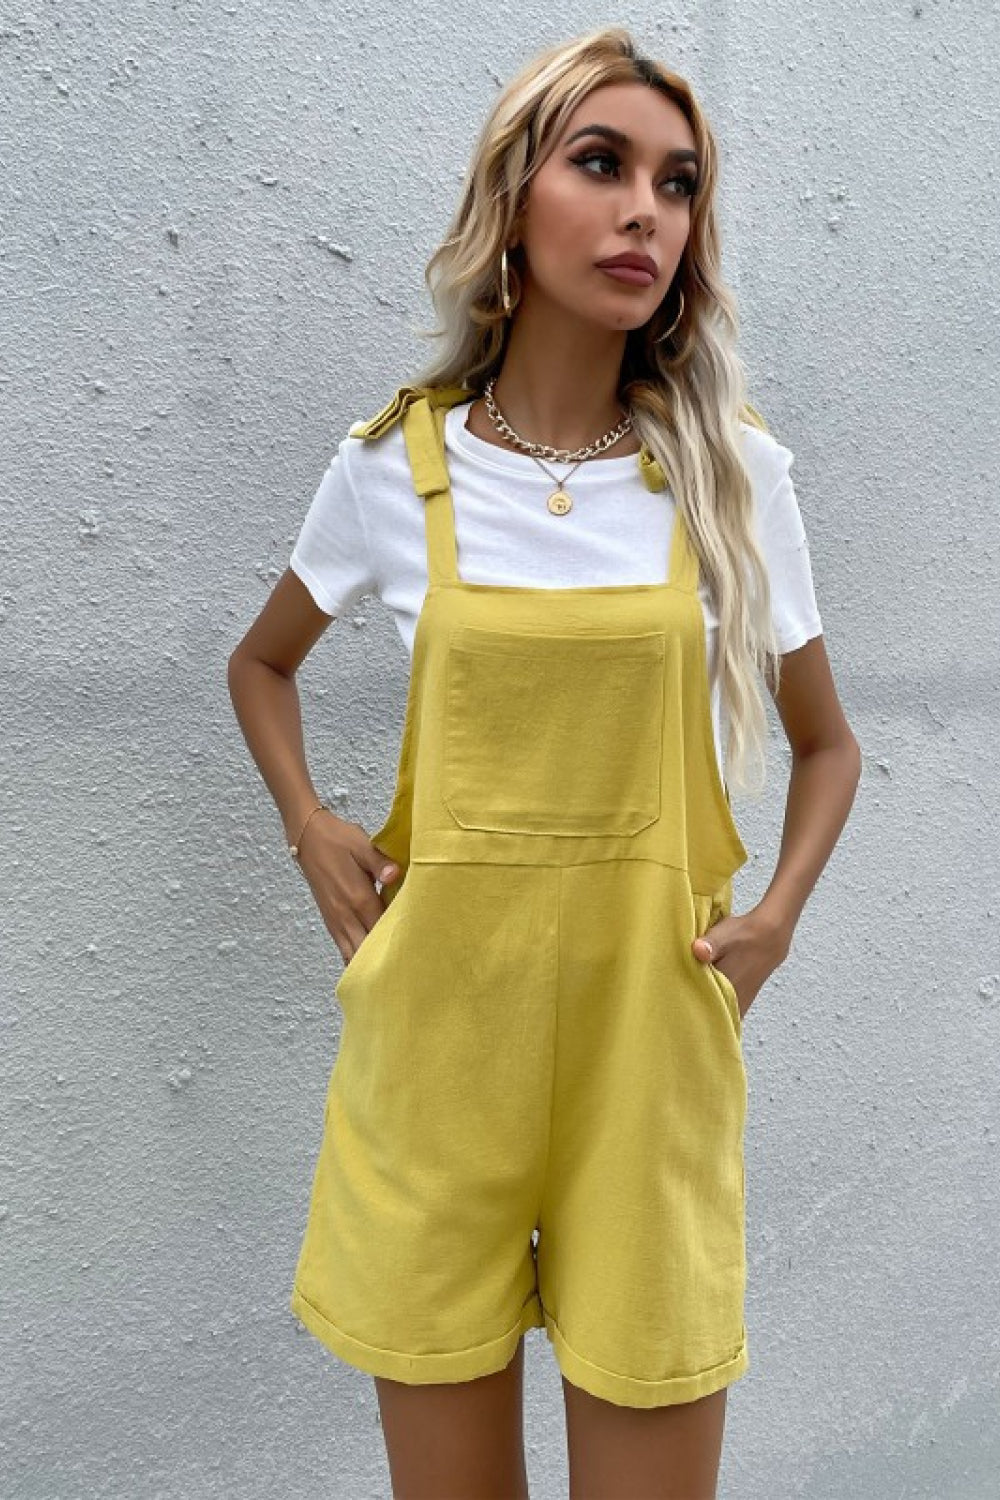 Tie Cuffed Short Overalls with Pockets Tie Cuffed Short Overalls with Pockets - M&R CORNER Trendsi Yellow / S